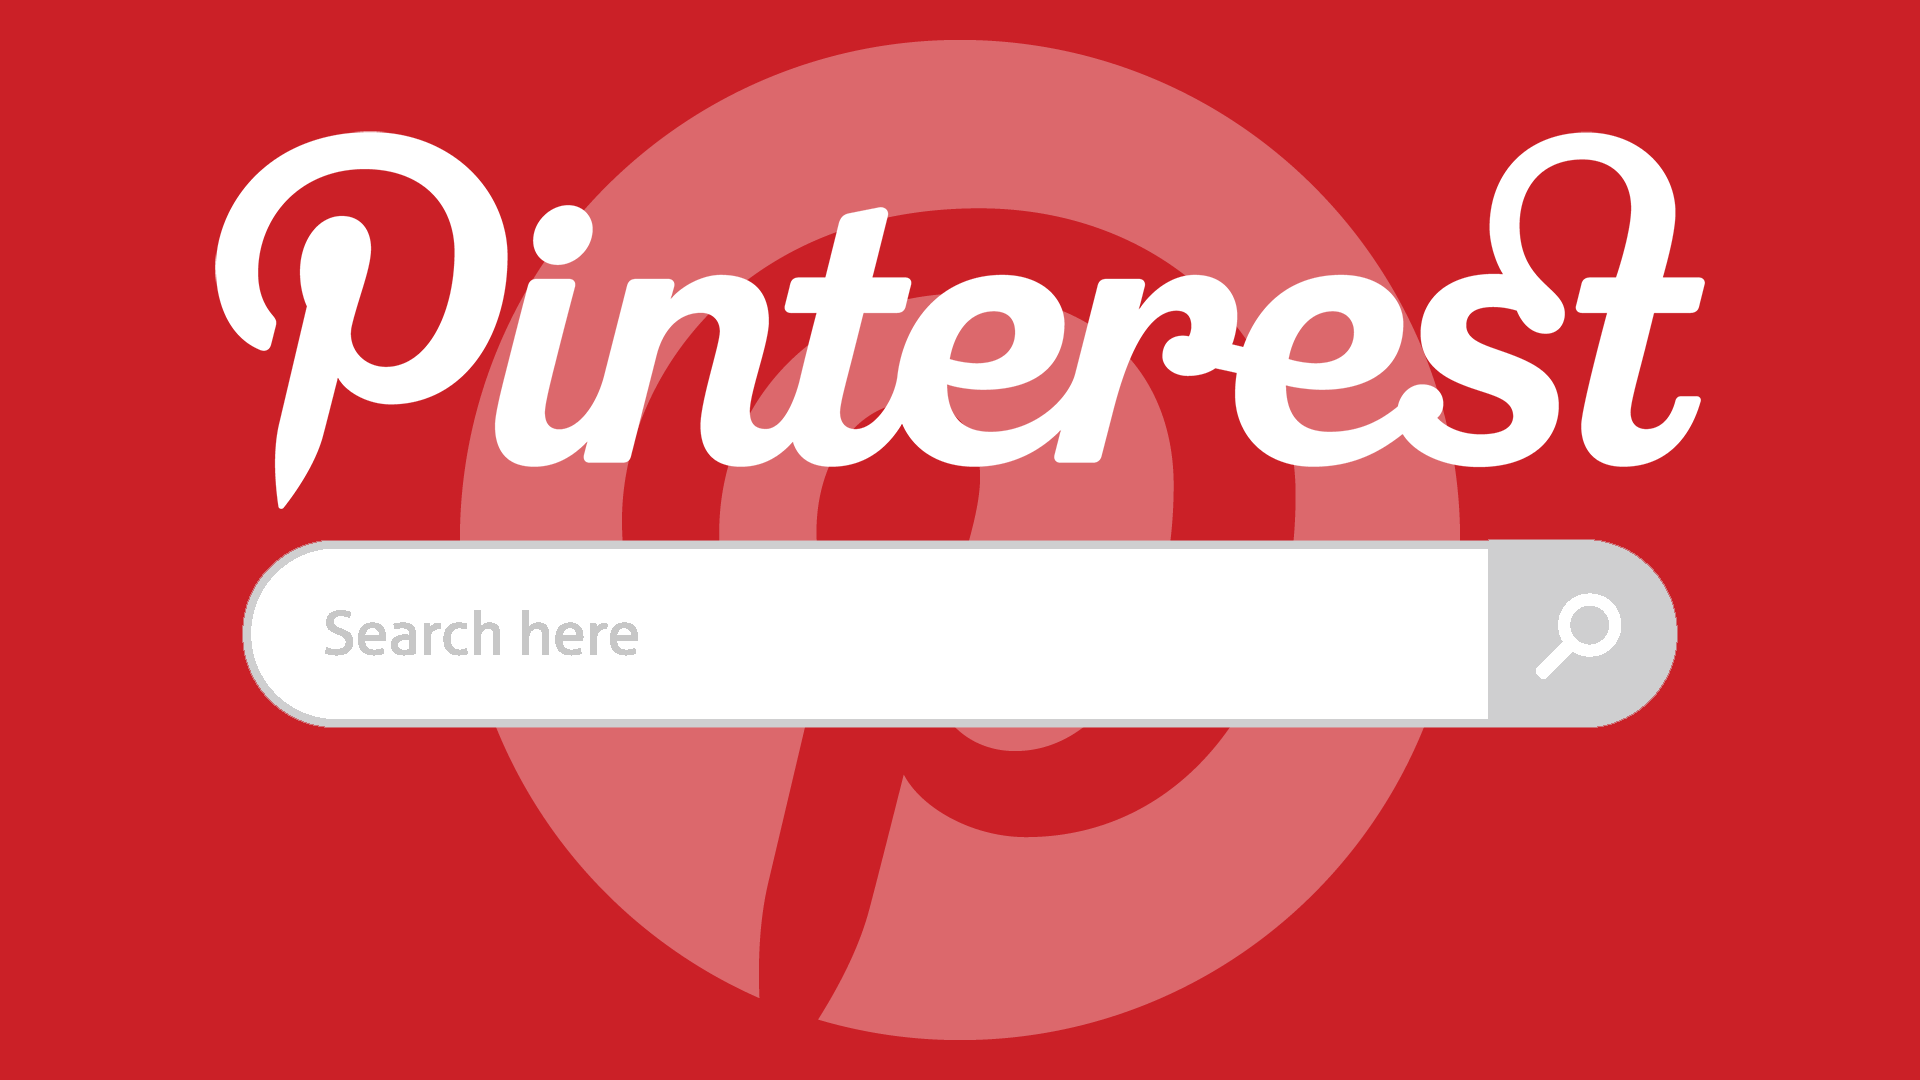 10 Clever Ways to Sell Your Product on Pinterest